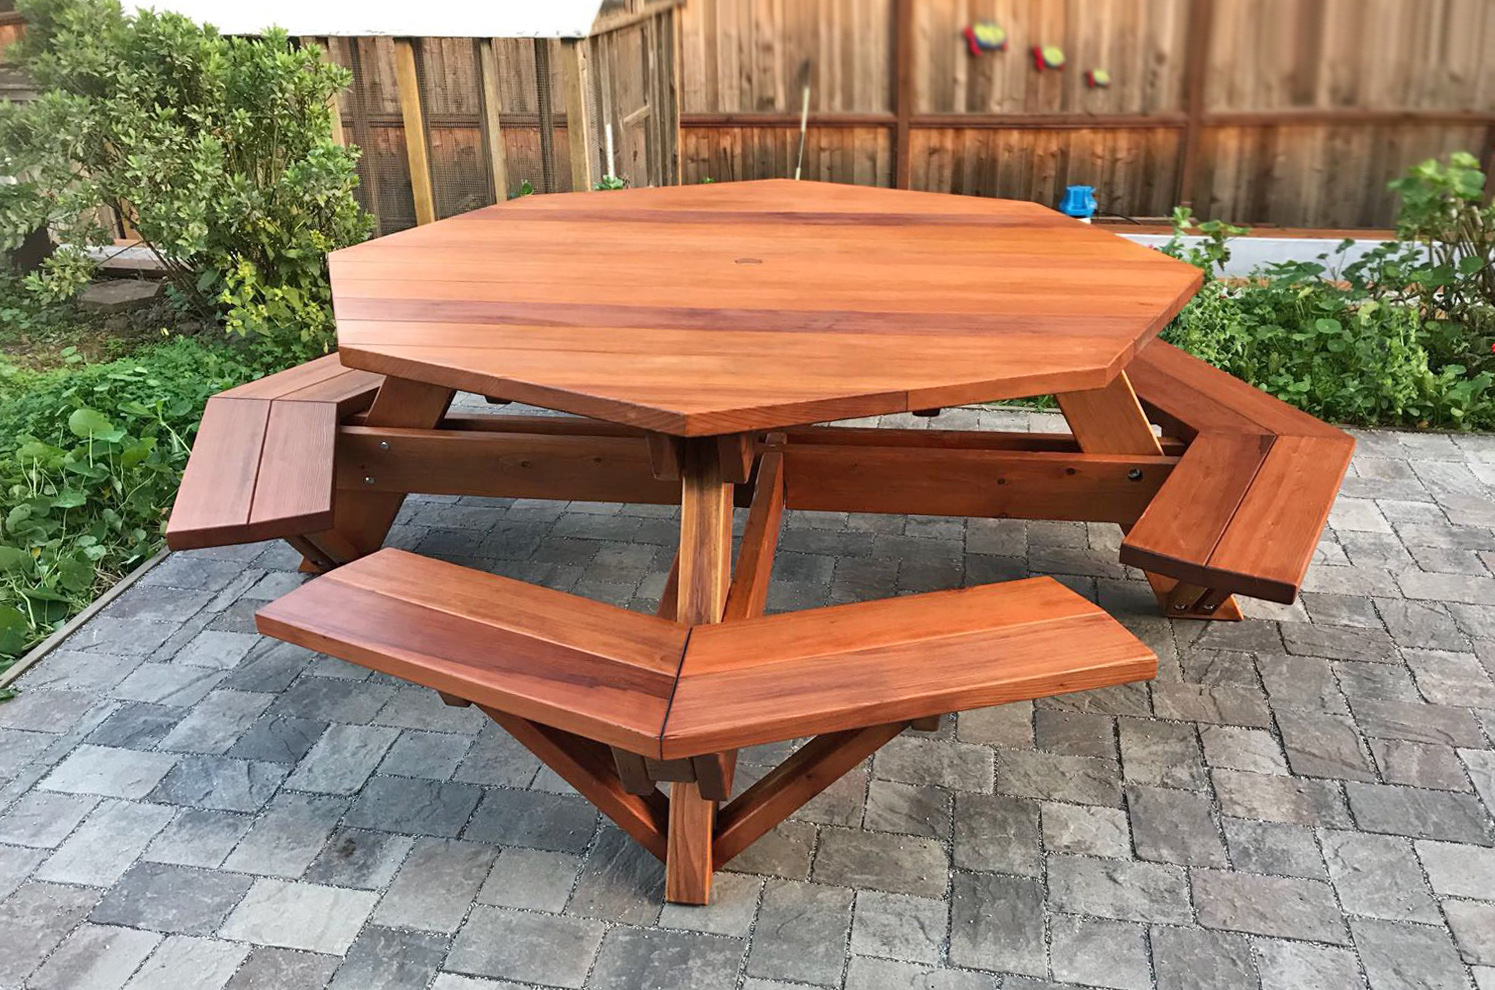 Octagon Picnic Table: Wood Picnic Table with Attached Bench